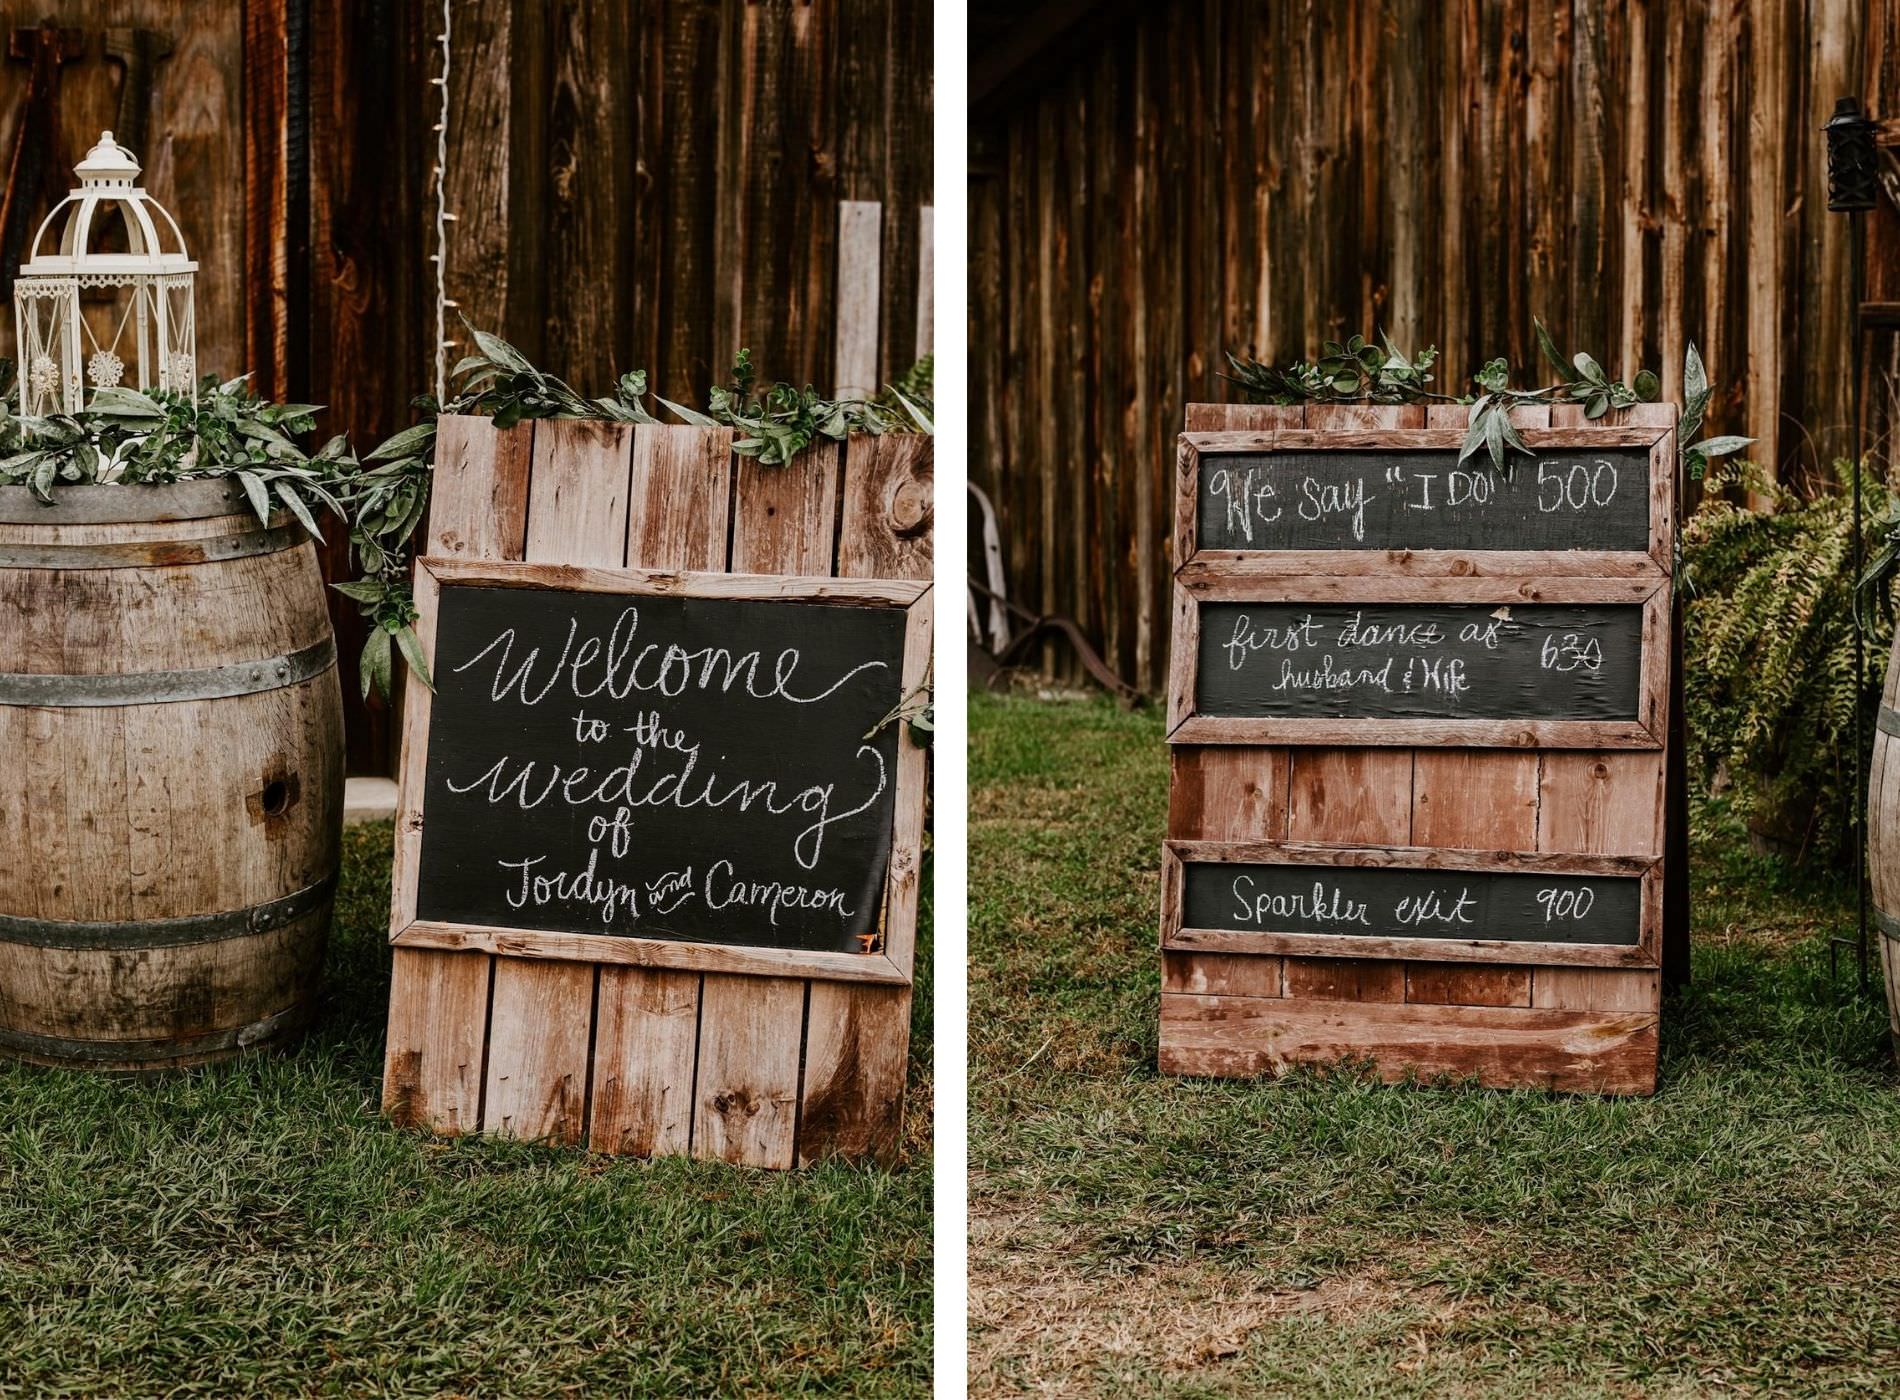 Rustic Barn Tampa Wedding with Wood Barrels and Chalkboard Welcome Sign and Chalkboard Itinerary Schedule Timeline